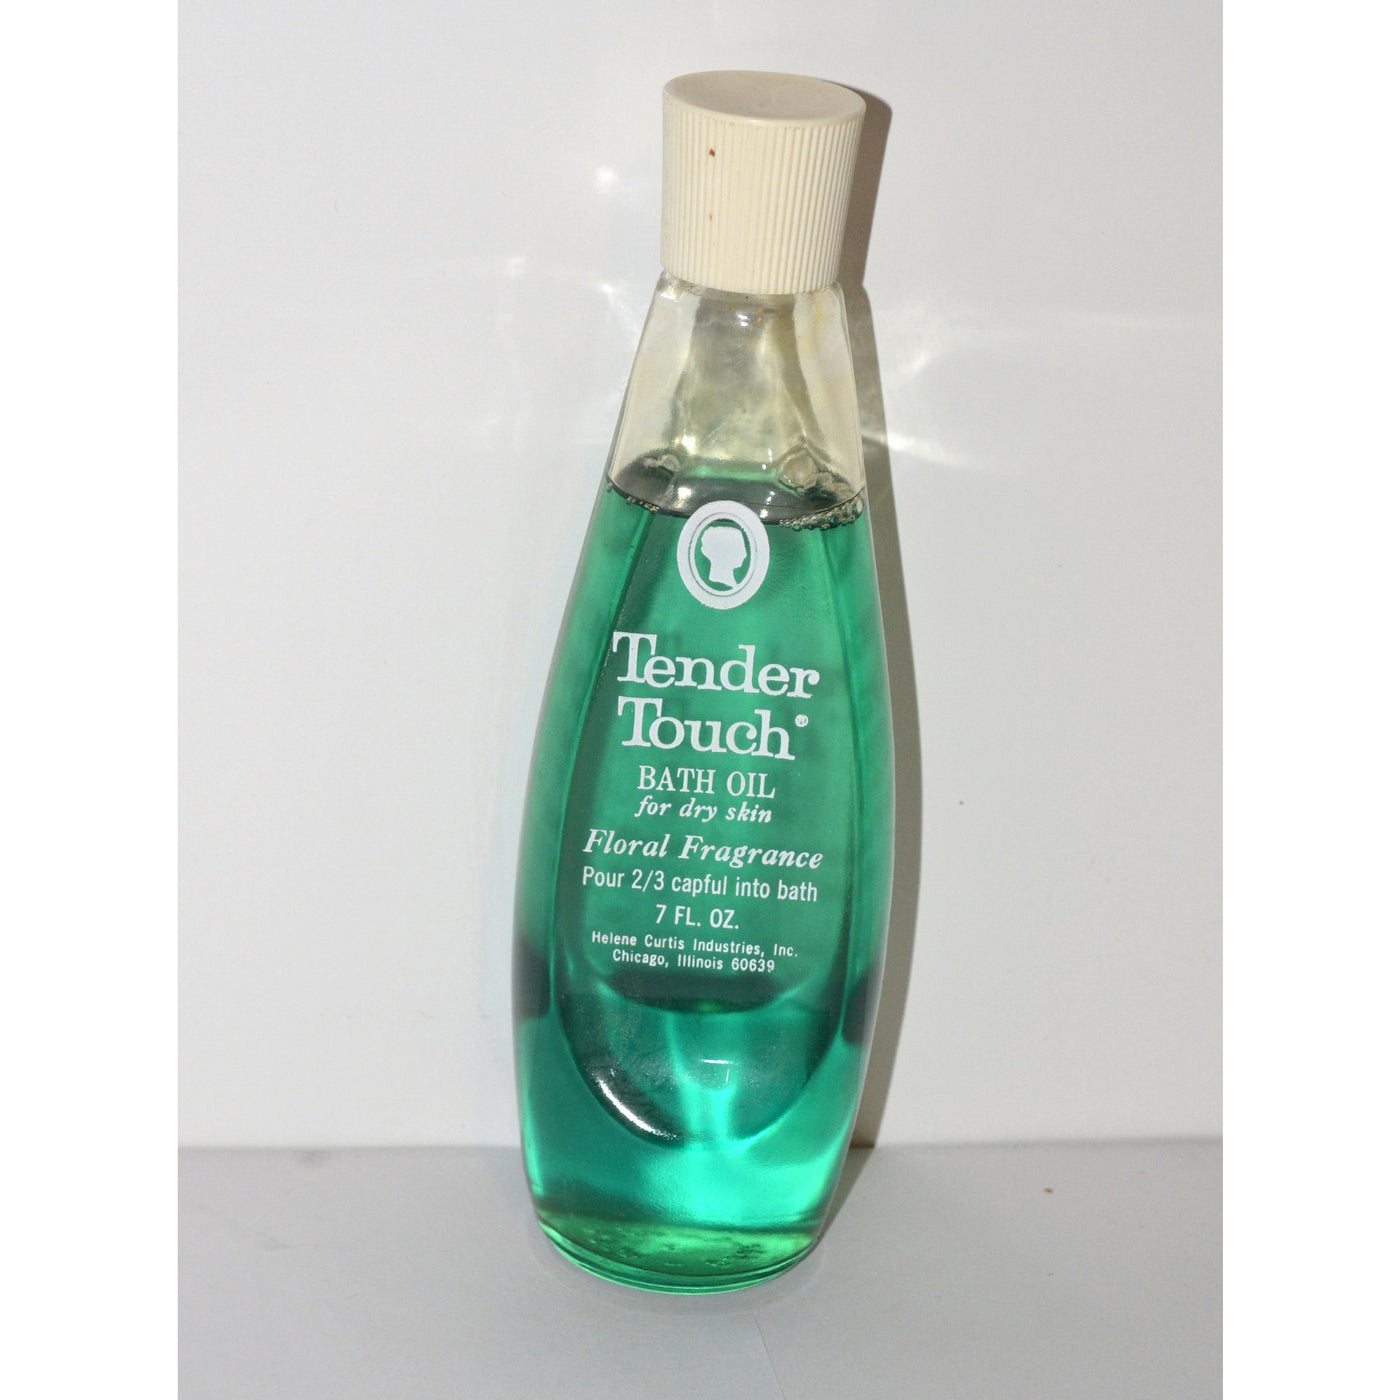 Vintage Tender Touch Bath Oil By Helen Curtis 